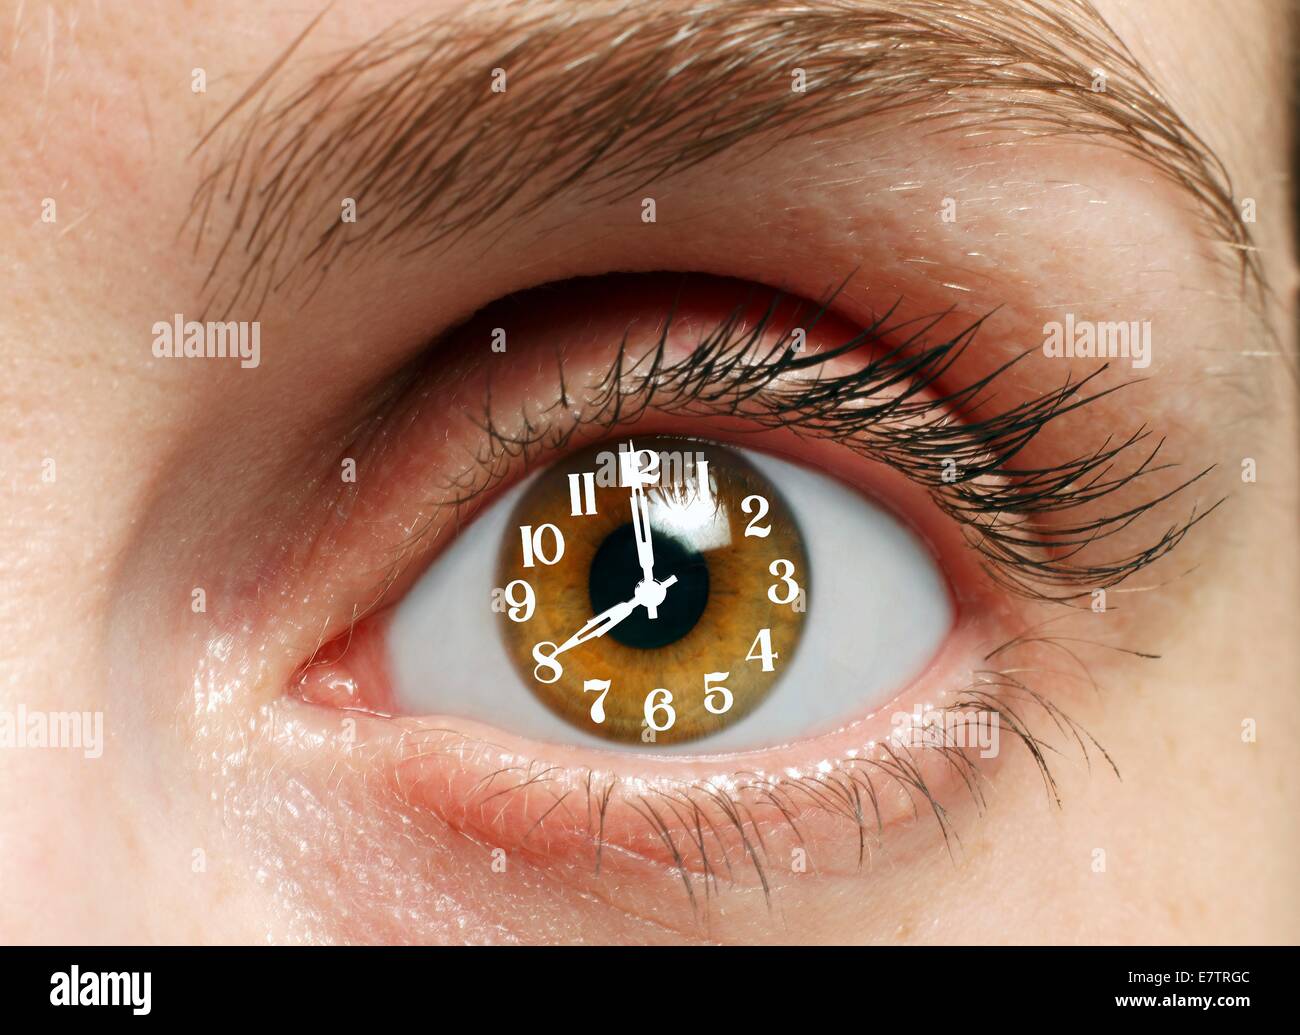 MODEL RELEASED. Eye with clock, composite image. Stock Photo